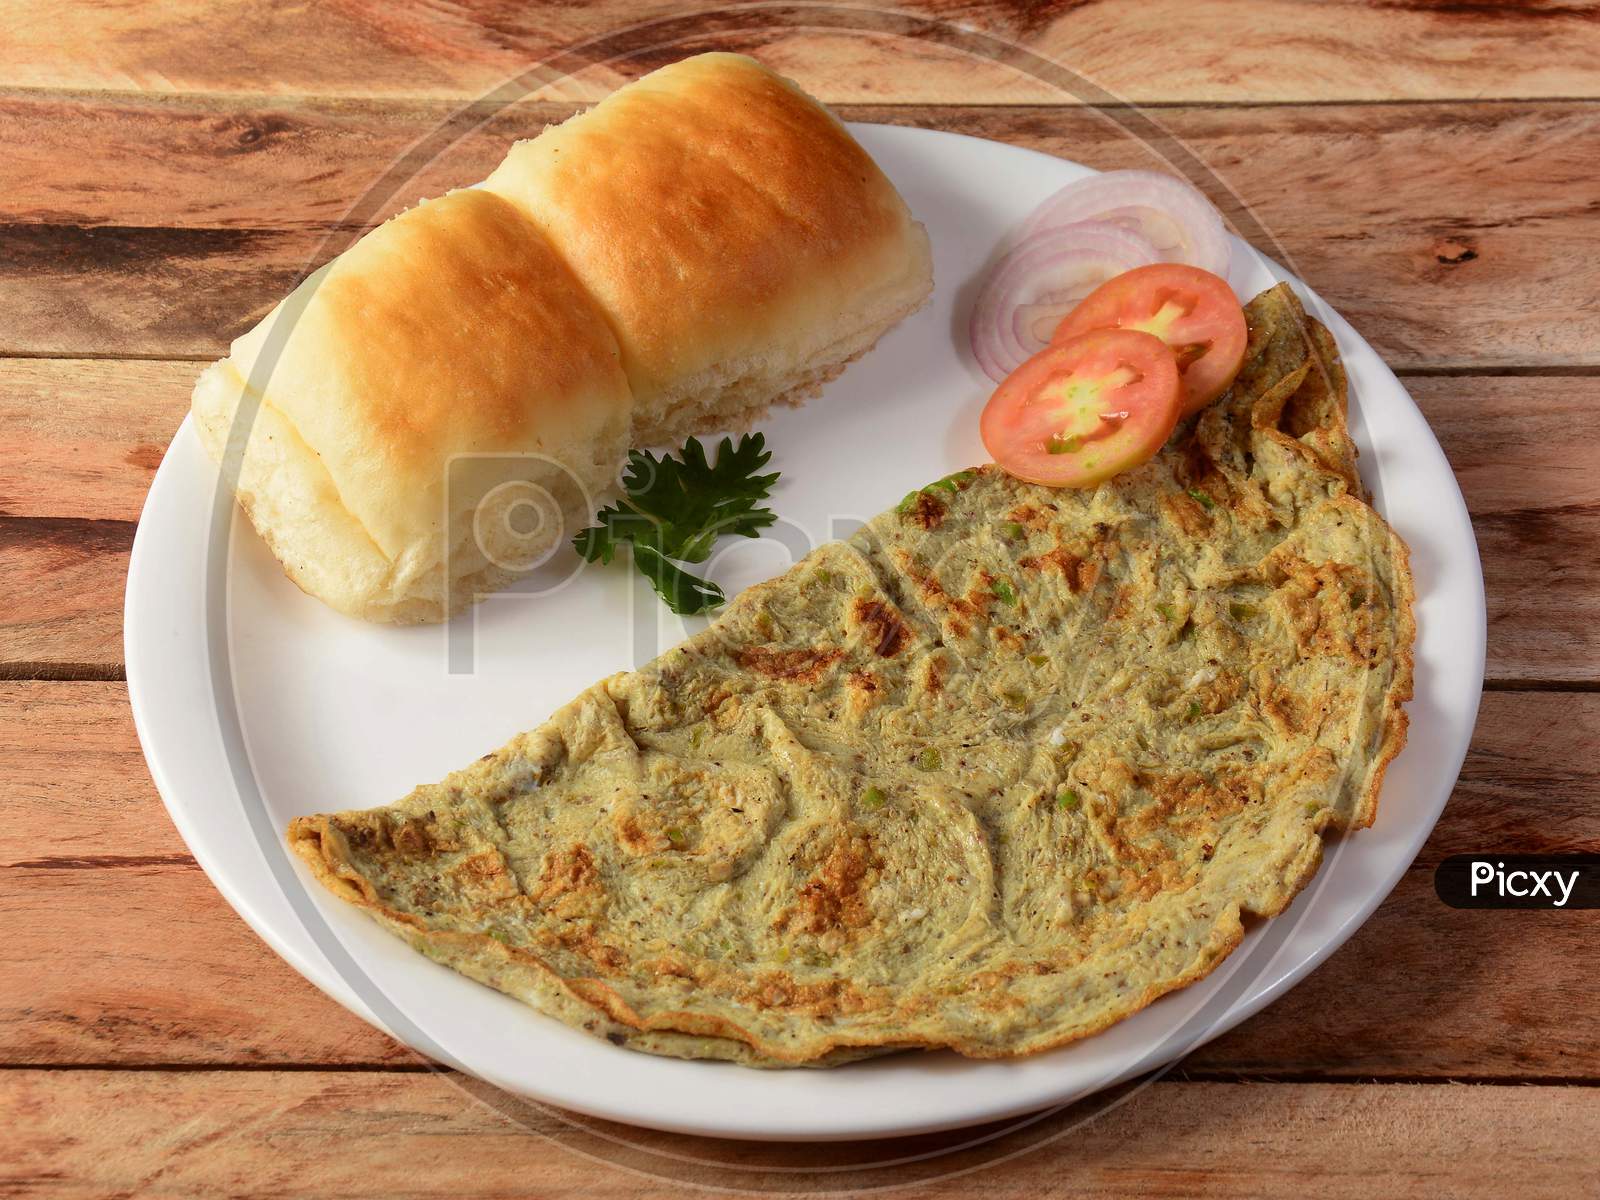 Indian Masala Egg Omelet, Made With Fresh Vegetables Tomato,Onion, Hot Chili Pepper, Parsley.. Served With Pav Bread On Rustic Wooden Background, Selective Focus